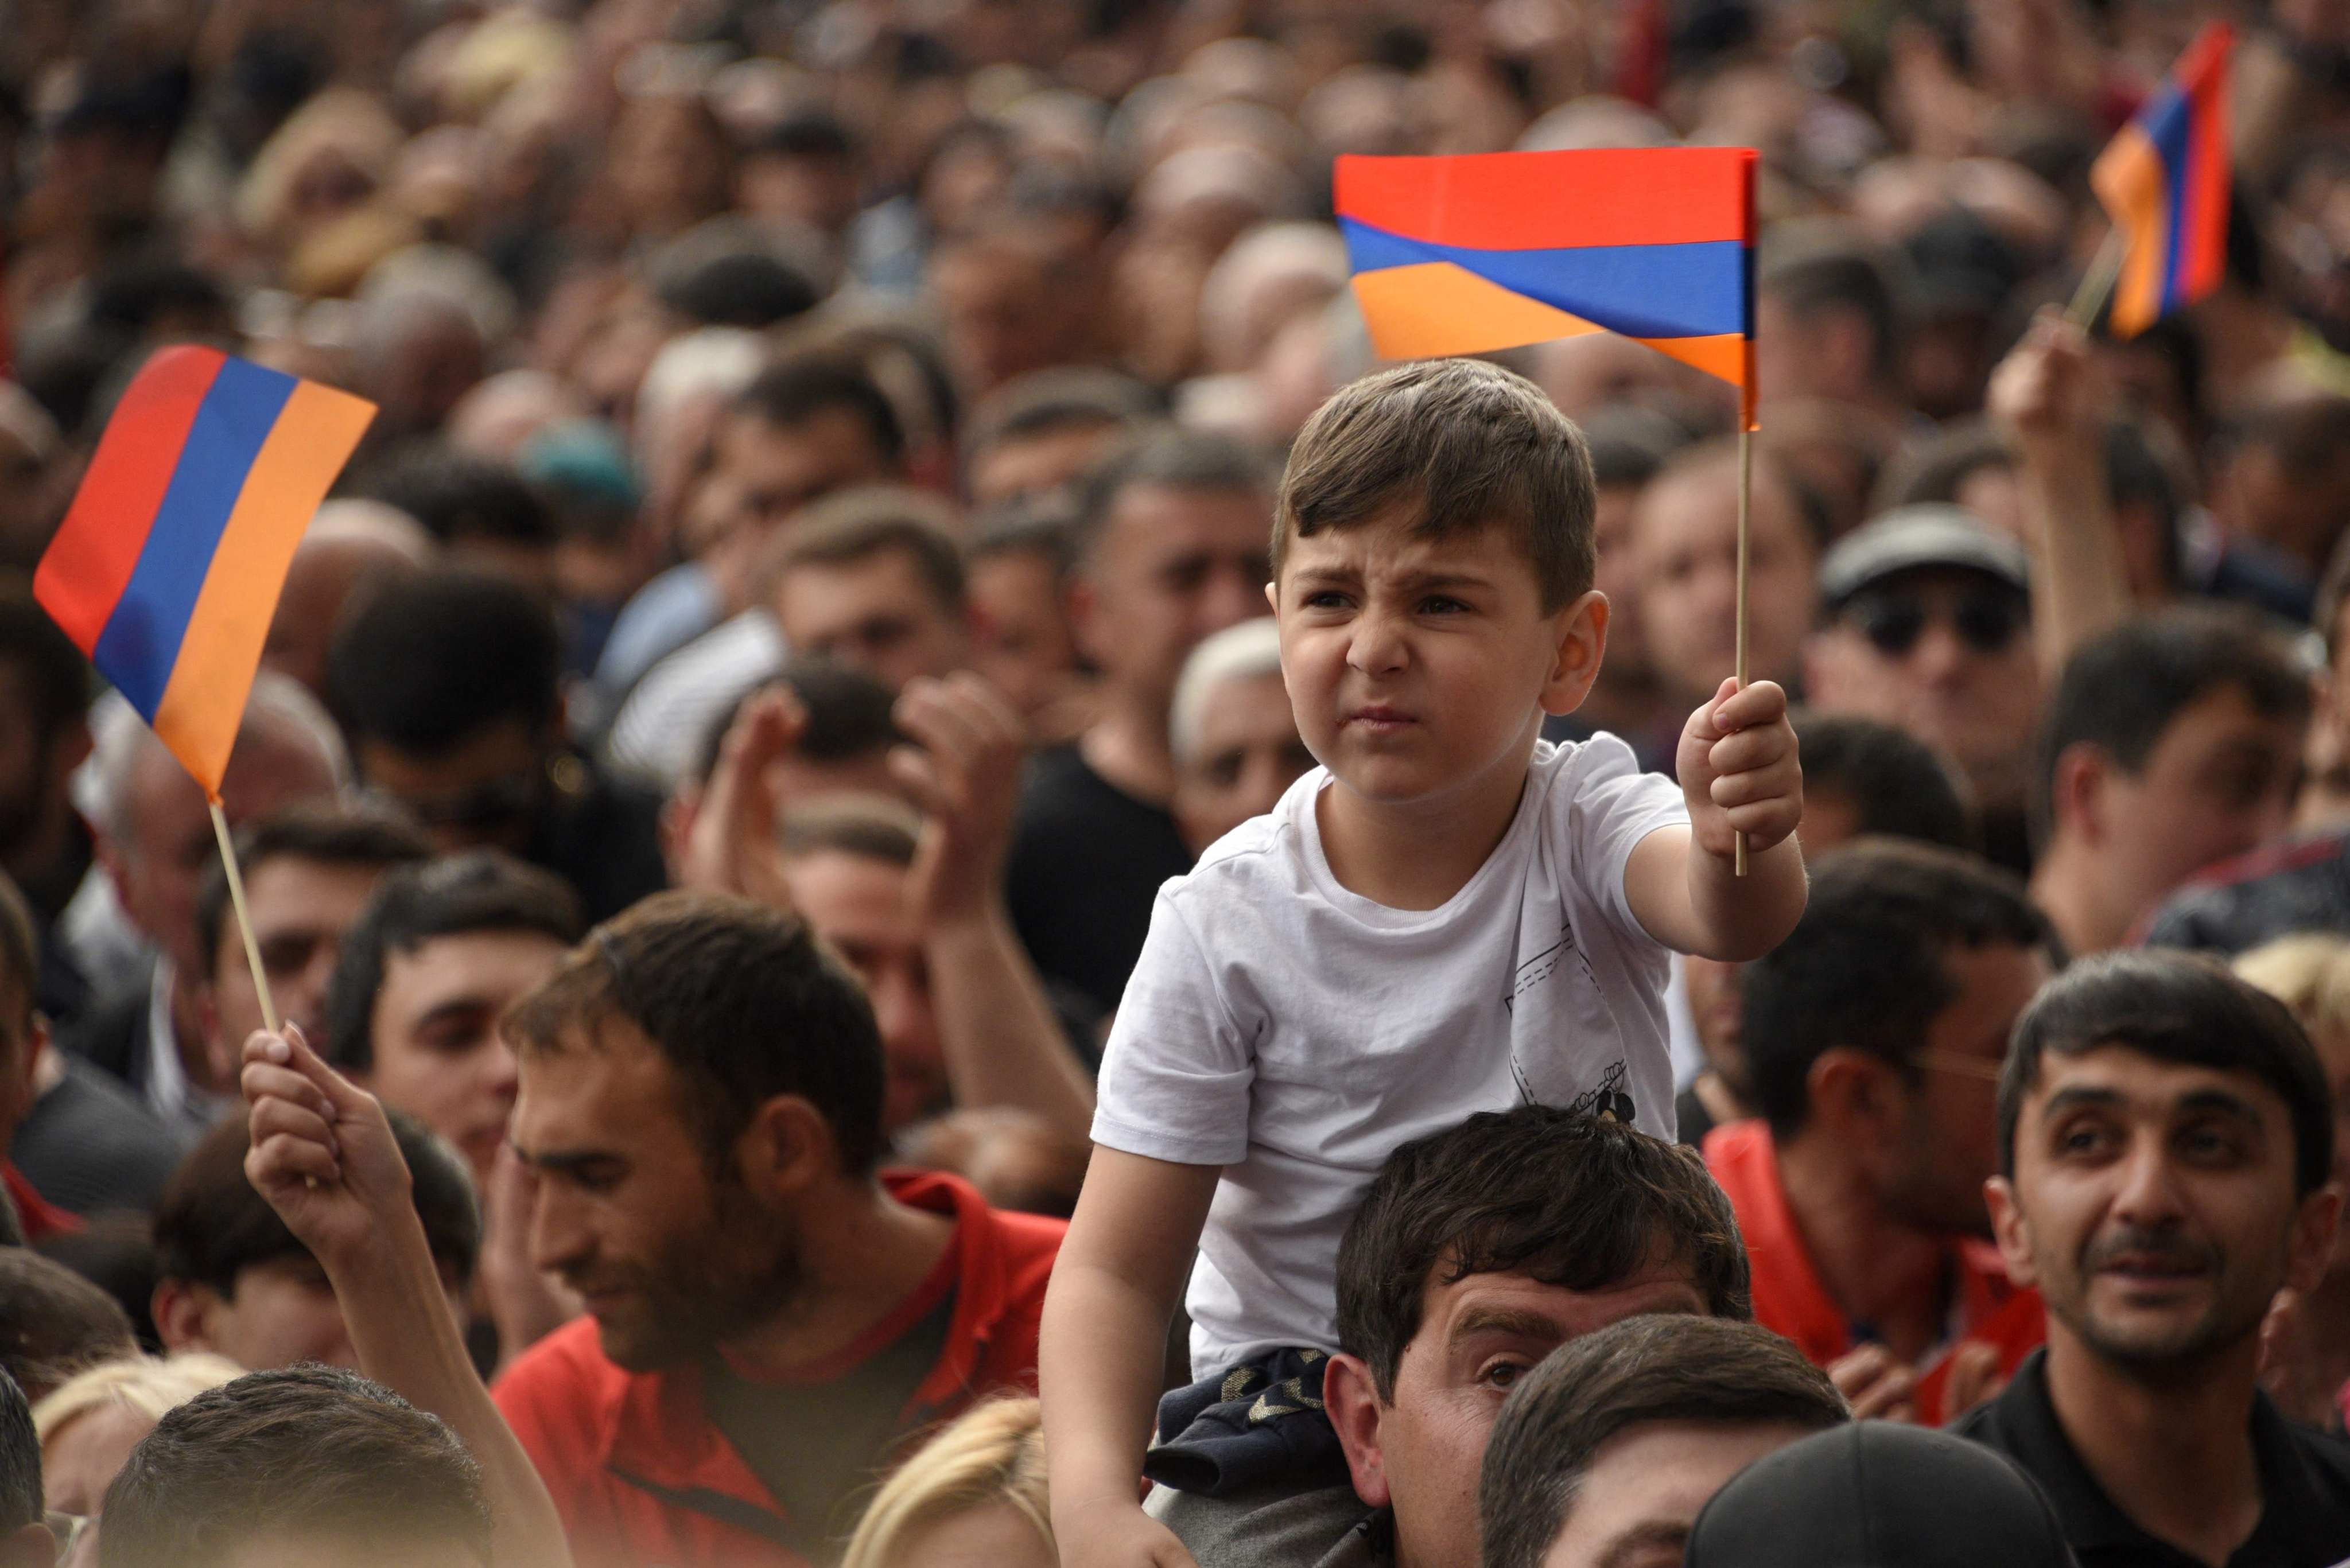 Armenian demonstrators wave national flags during a rally in Yerevan on May 1, 2022, against concessions to arch-foe Azerbaijan over the long-disputed Nagorno-Karabakh region. Photo: AFP